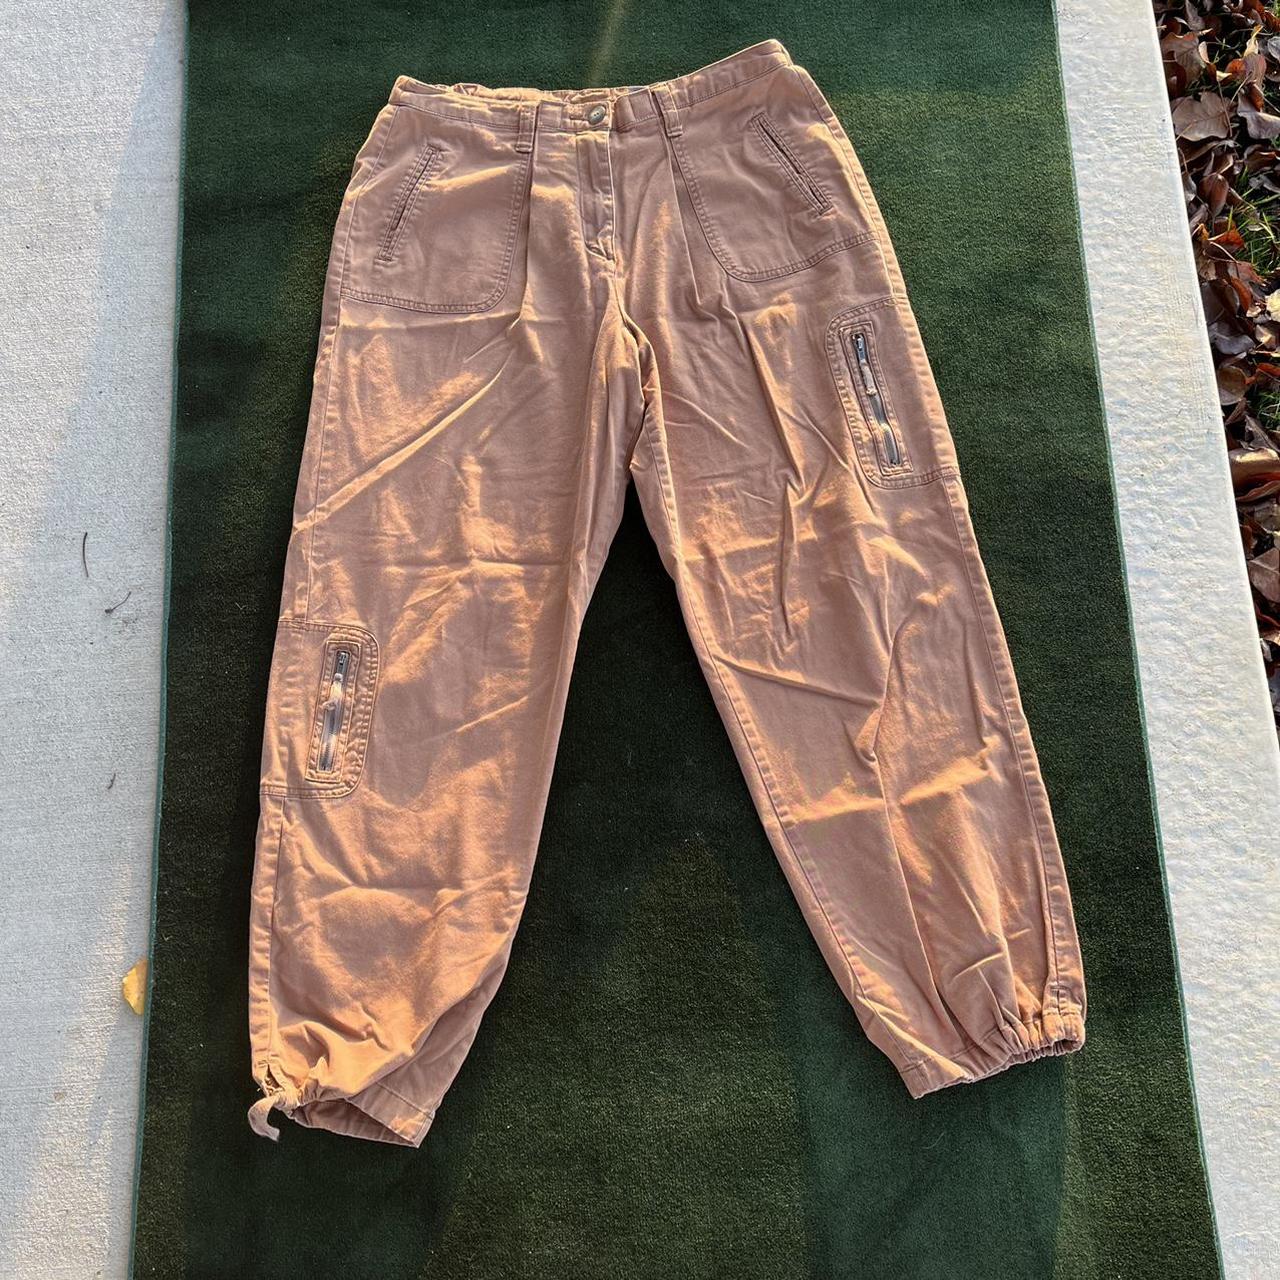 Product Image 2 - Brown colored cargo pants with